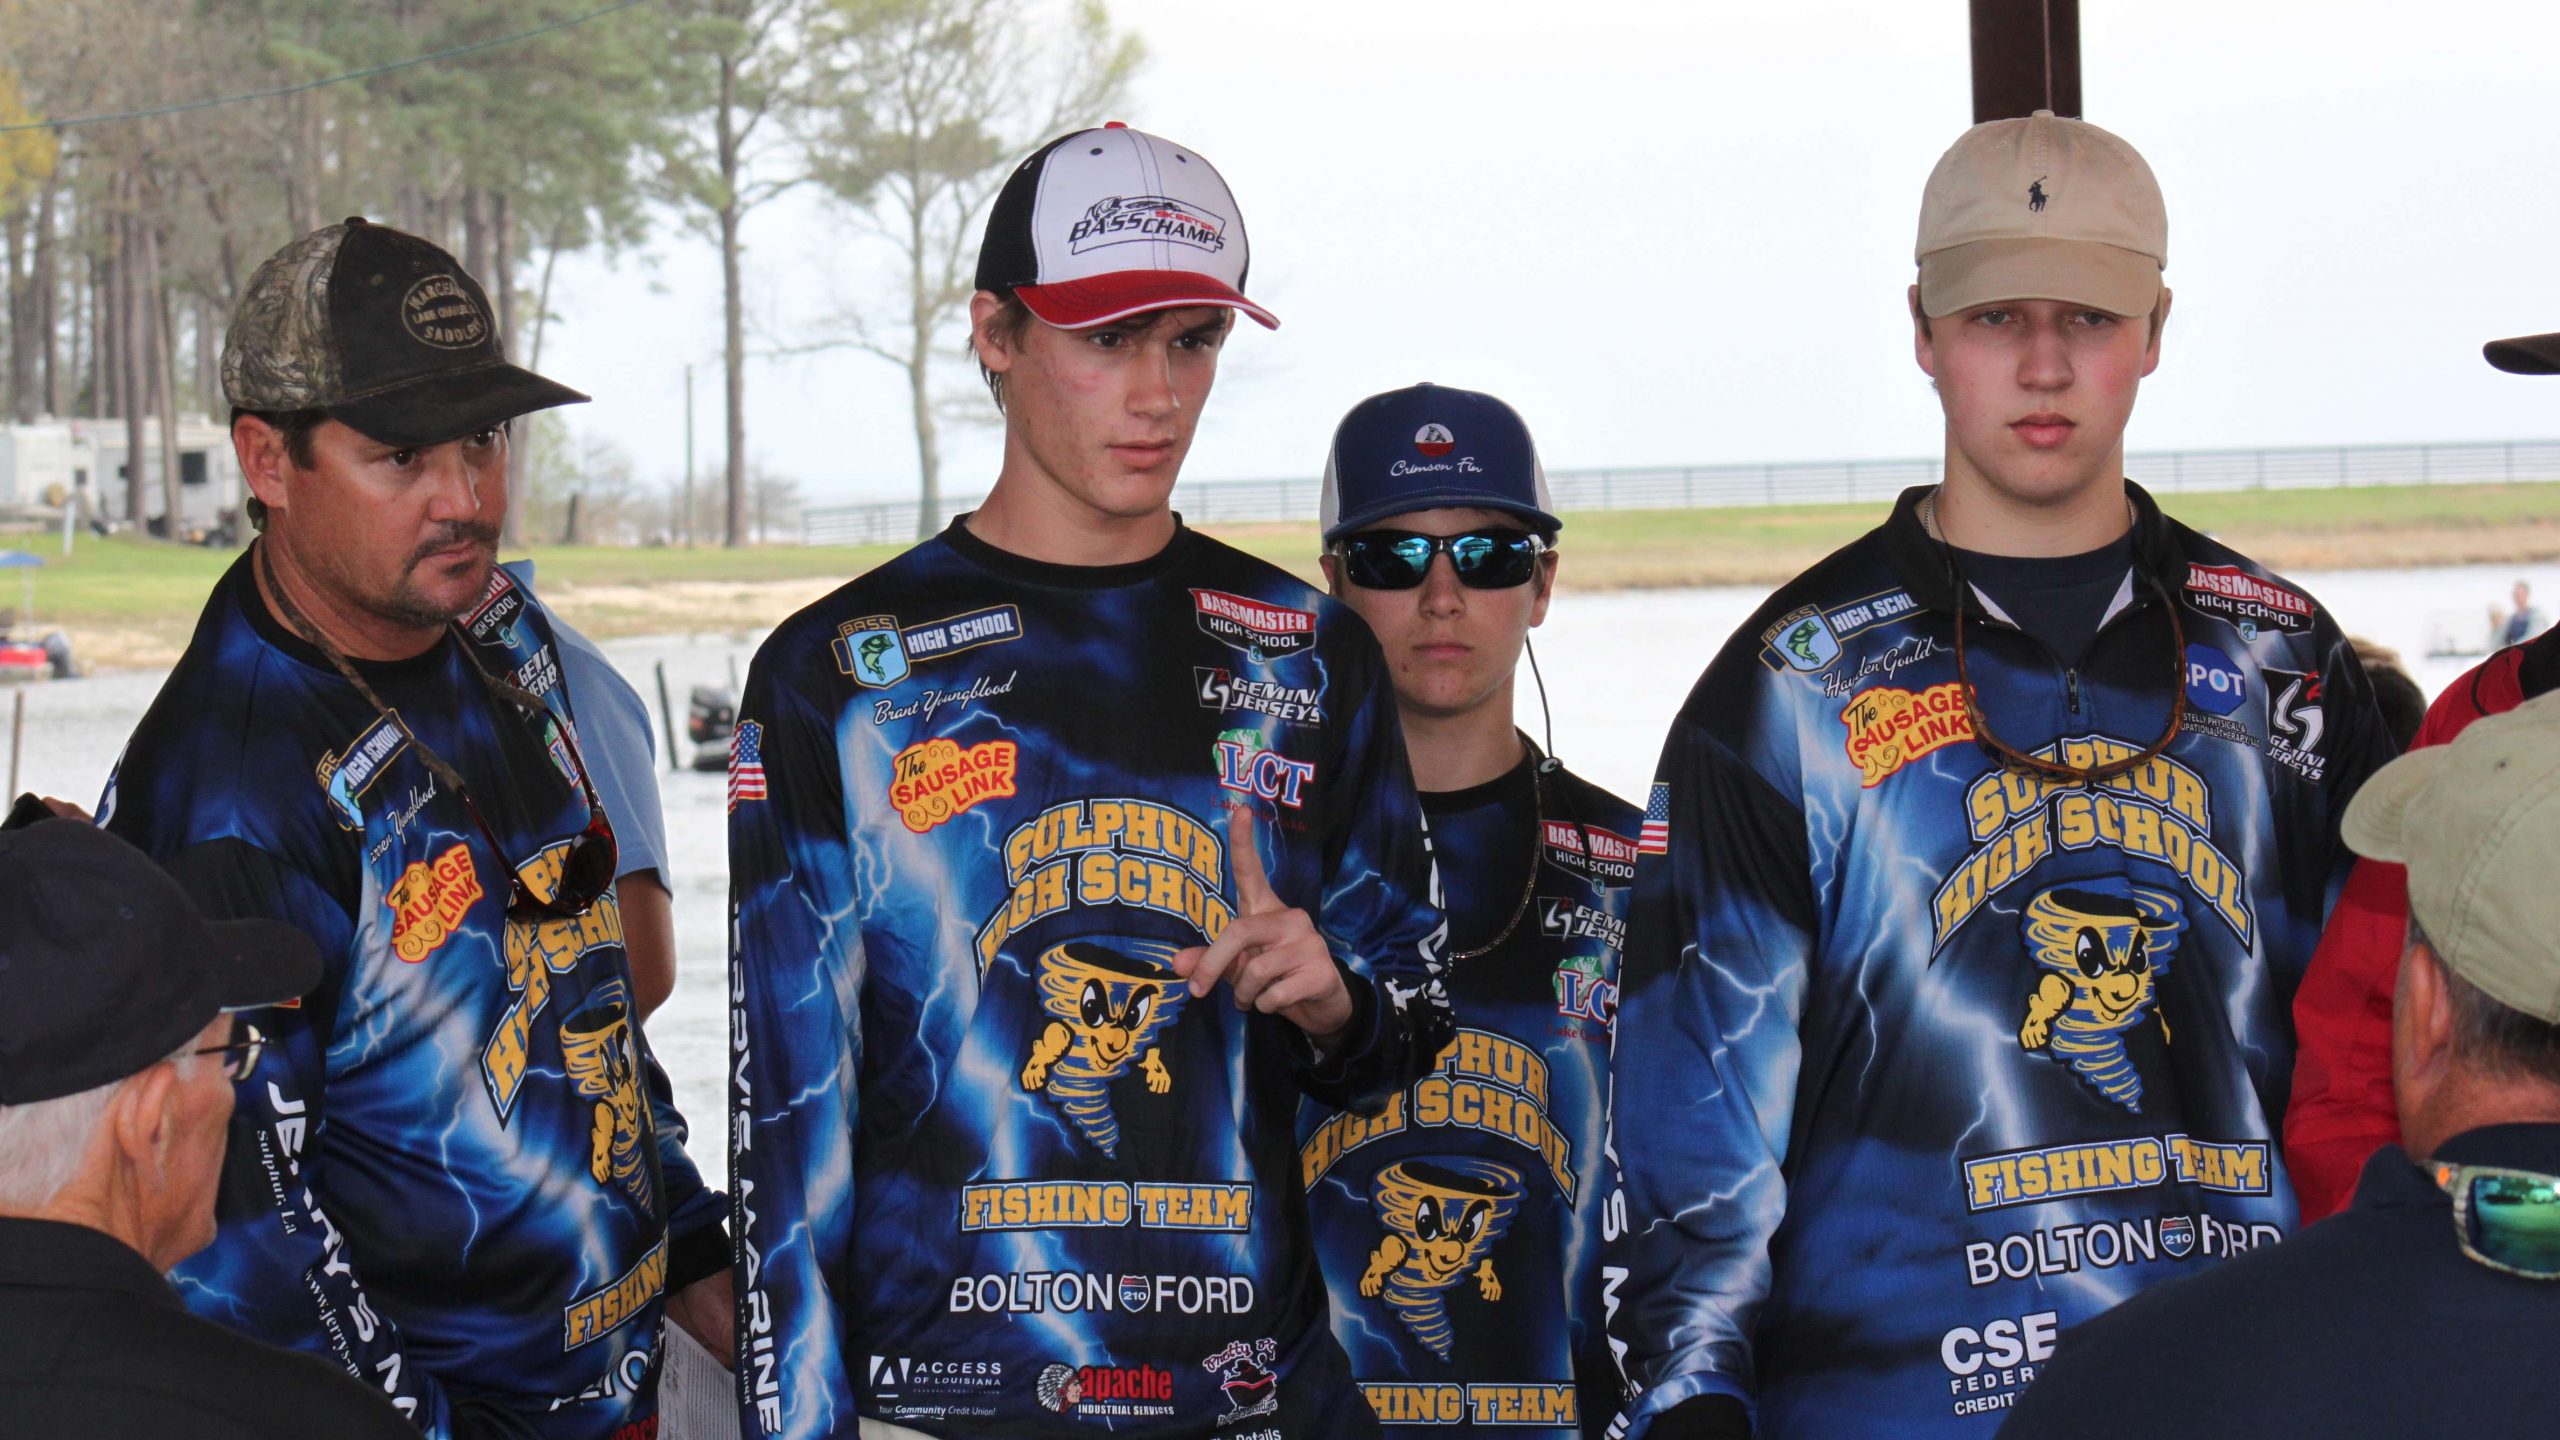 Sulphur (La.) High School has numerous tandems taking part in
the Central Open on Toledo Bend.